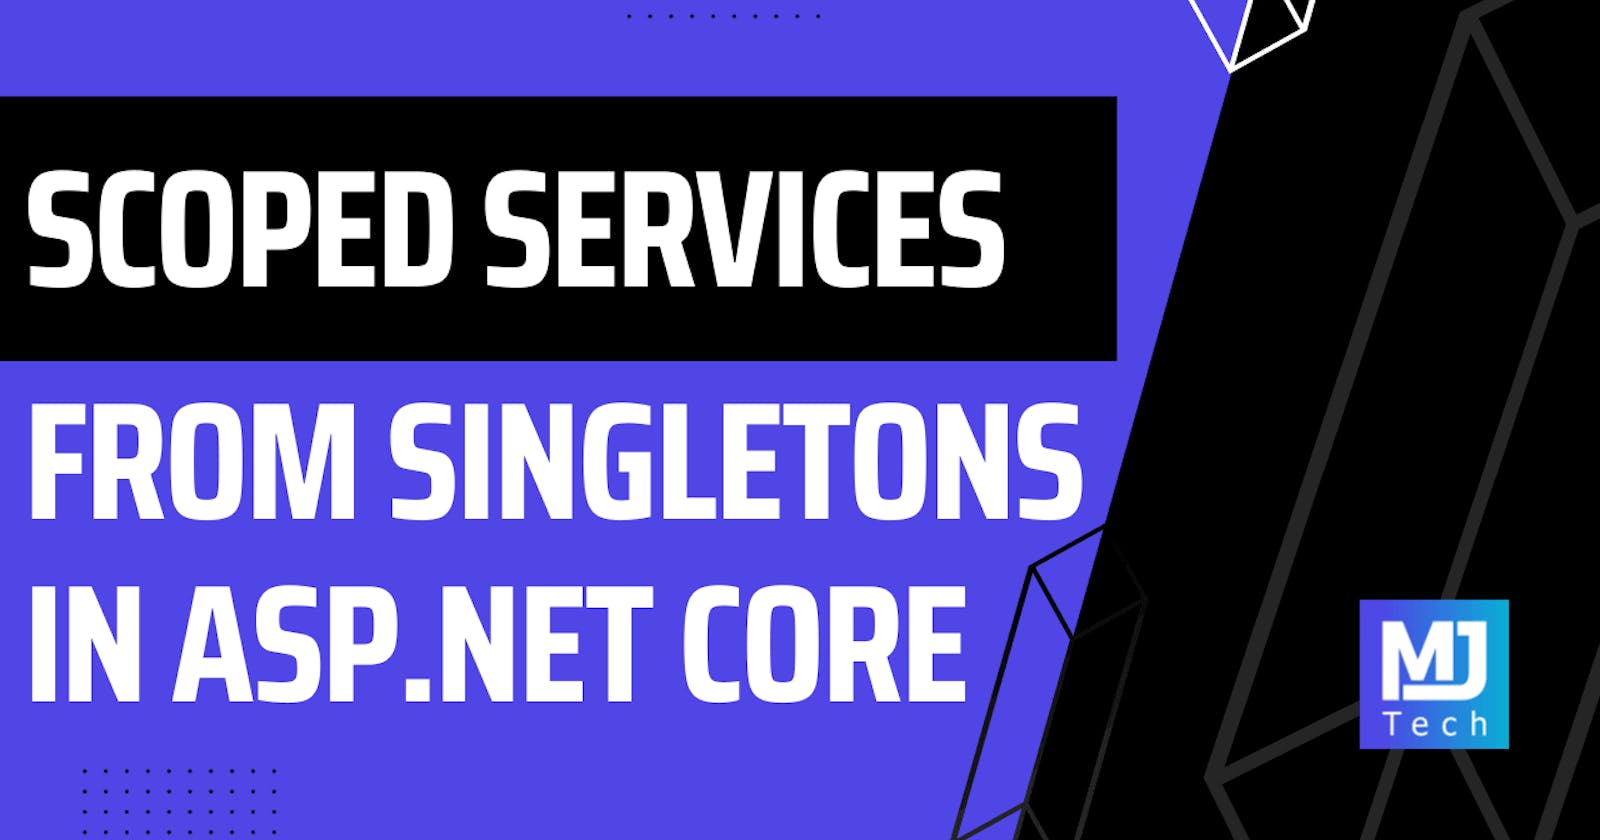 Using Scoped Services From Singletons in ASP.NET Core